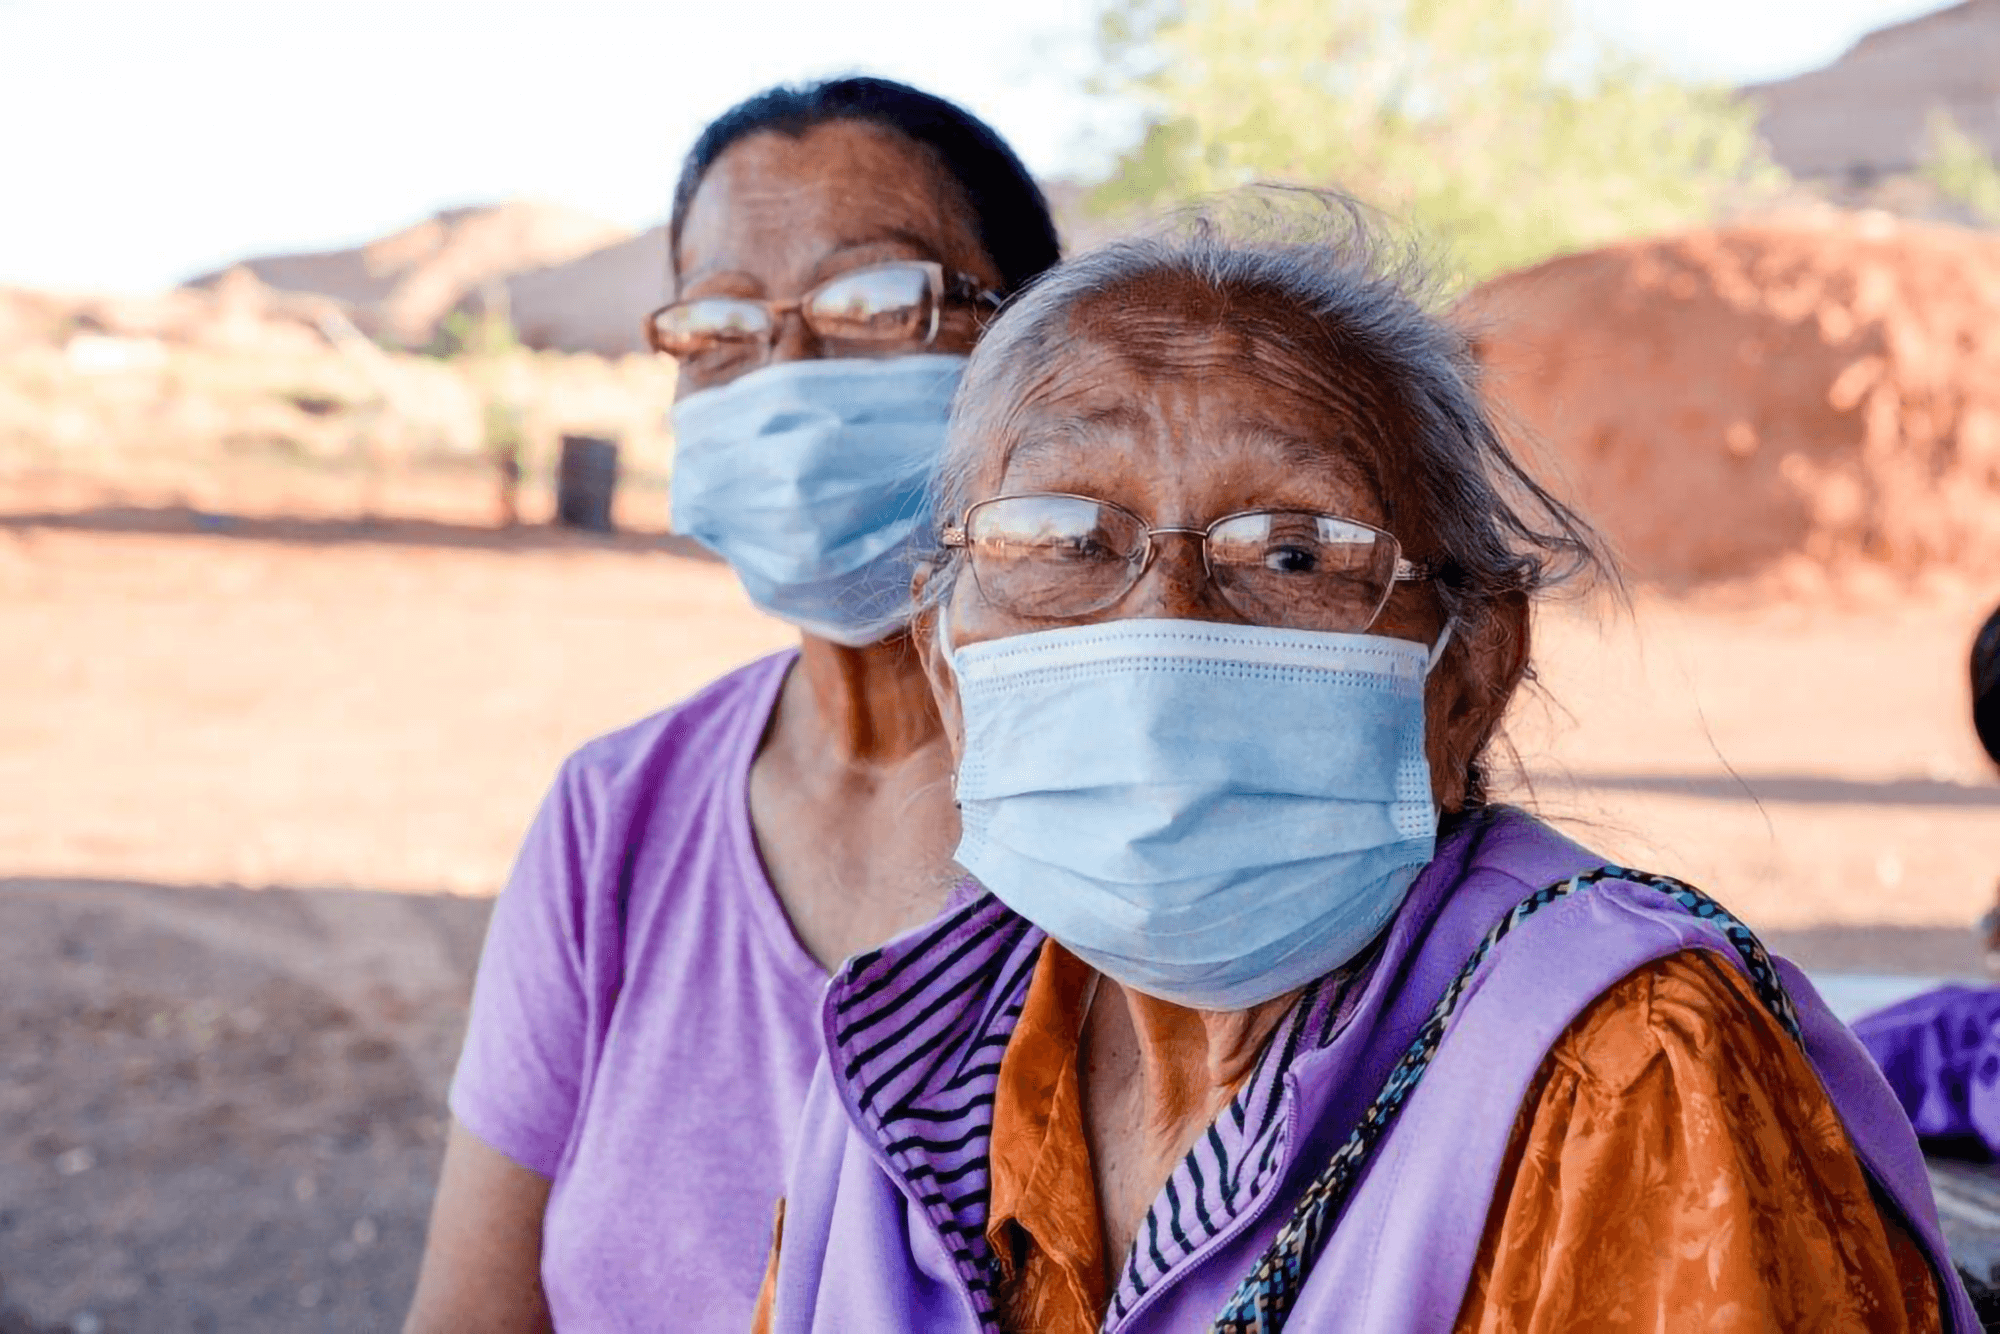 An elderly indigenous woman and a middle-aged indigenous woman both wearing glasses and masks sitting together outside in a dessert environment.